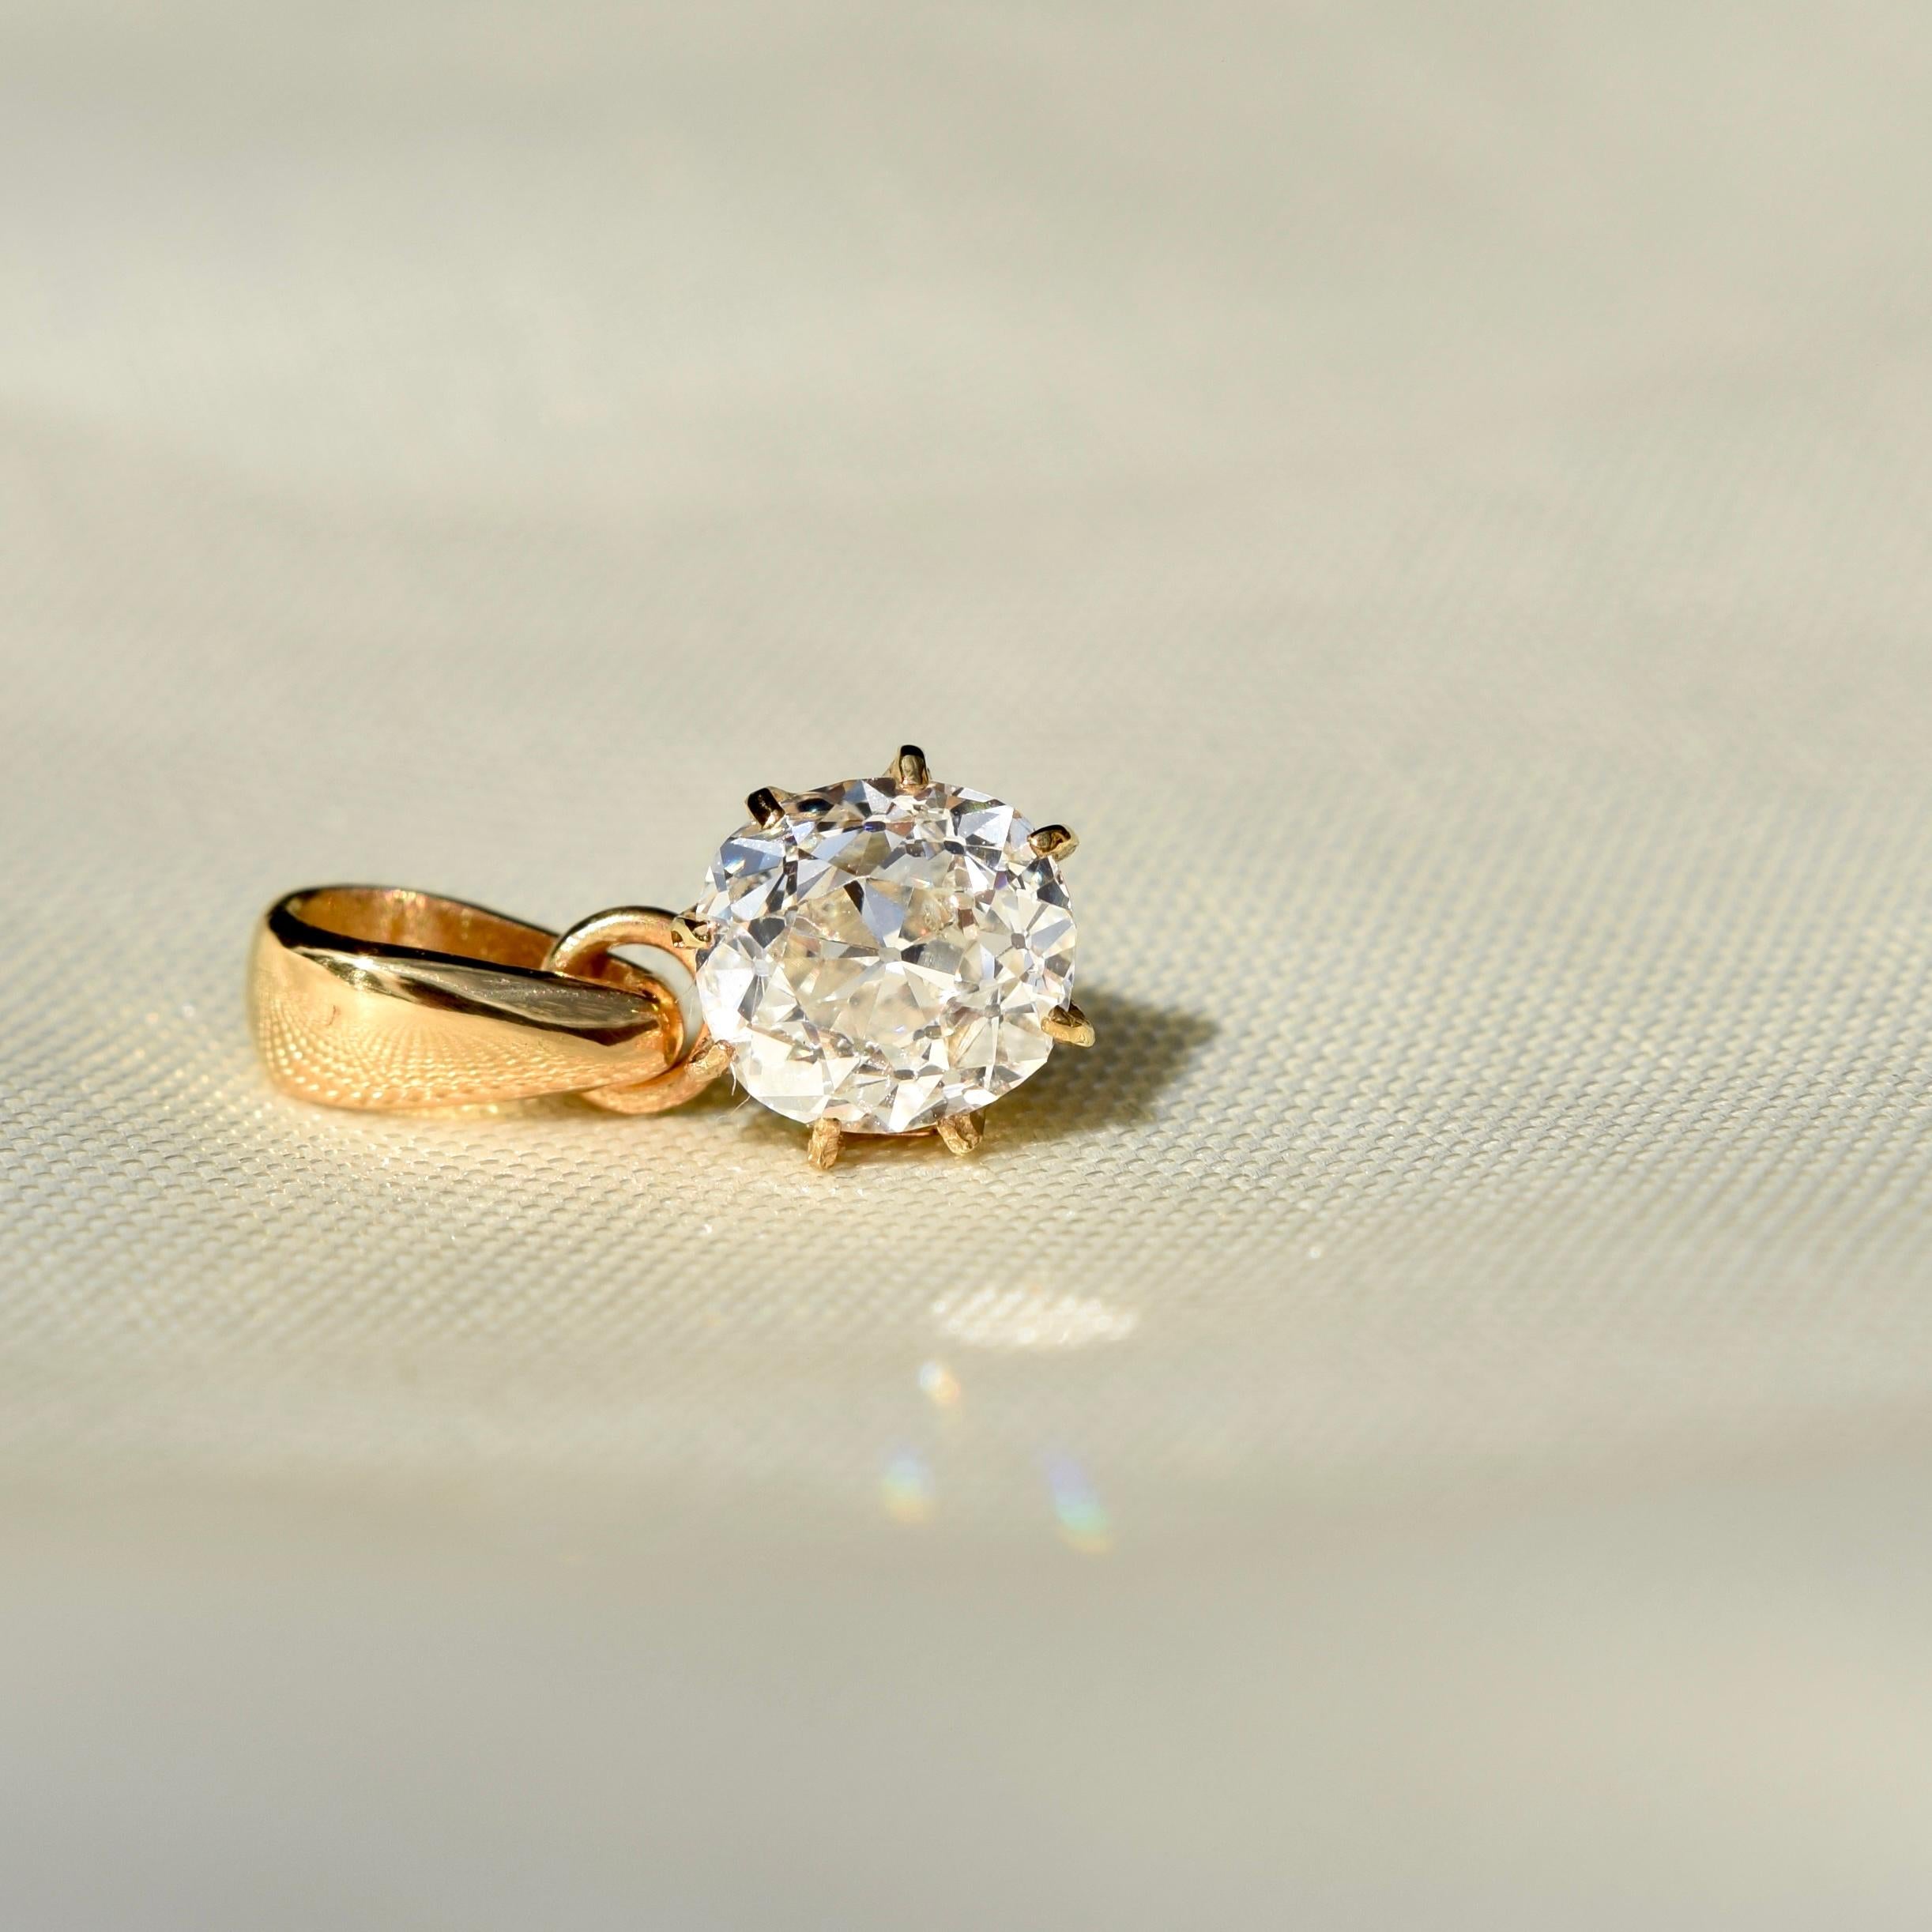 The diamond is set in its original setting, made in Germany around 1900. The bail was added recently. 

This diamond is GIA certified.

- One old mine cut diamond, 5.72 x 5.32 x 4.12 mm/ 0.87ct (L/ SI2) 
- 750/ 18ct solid yellow gold 
- Length: 13